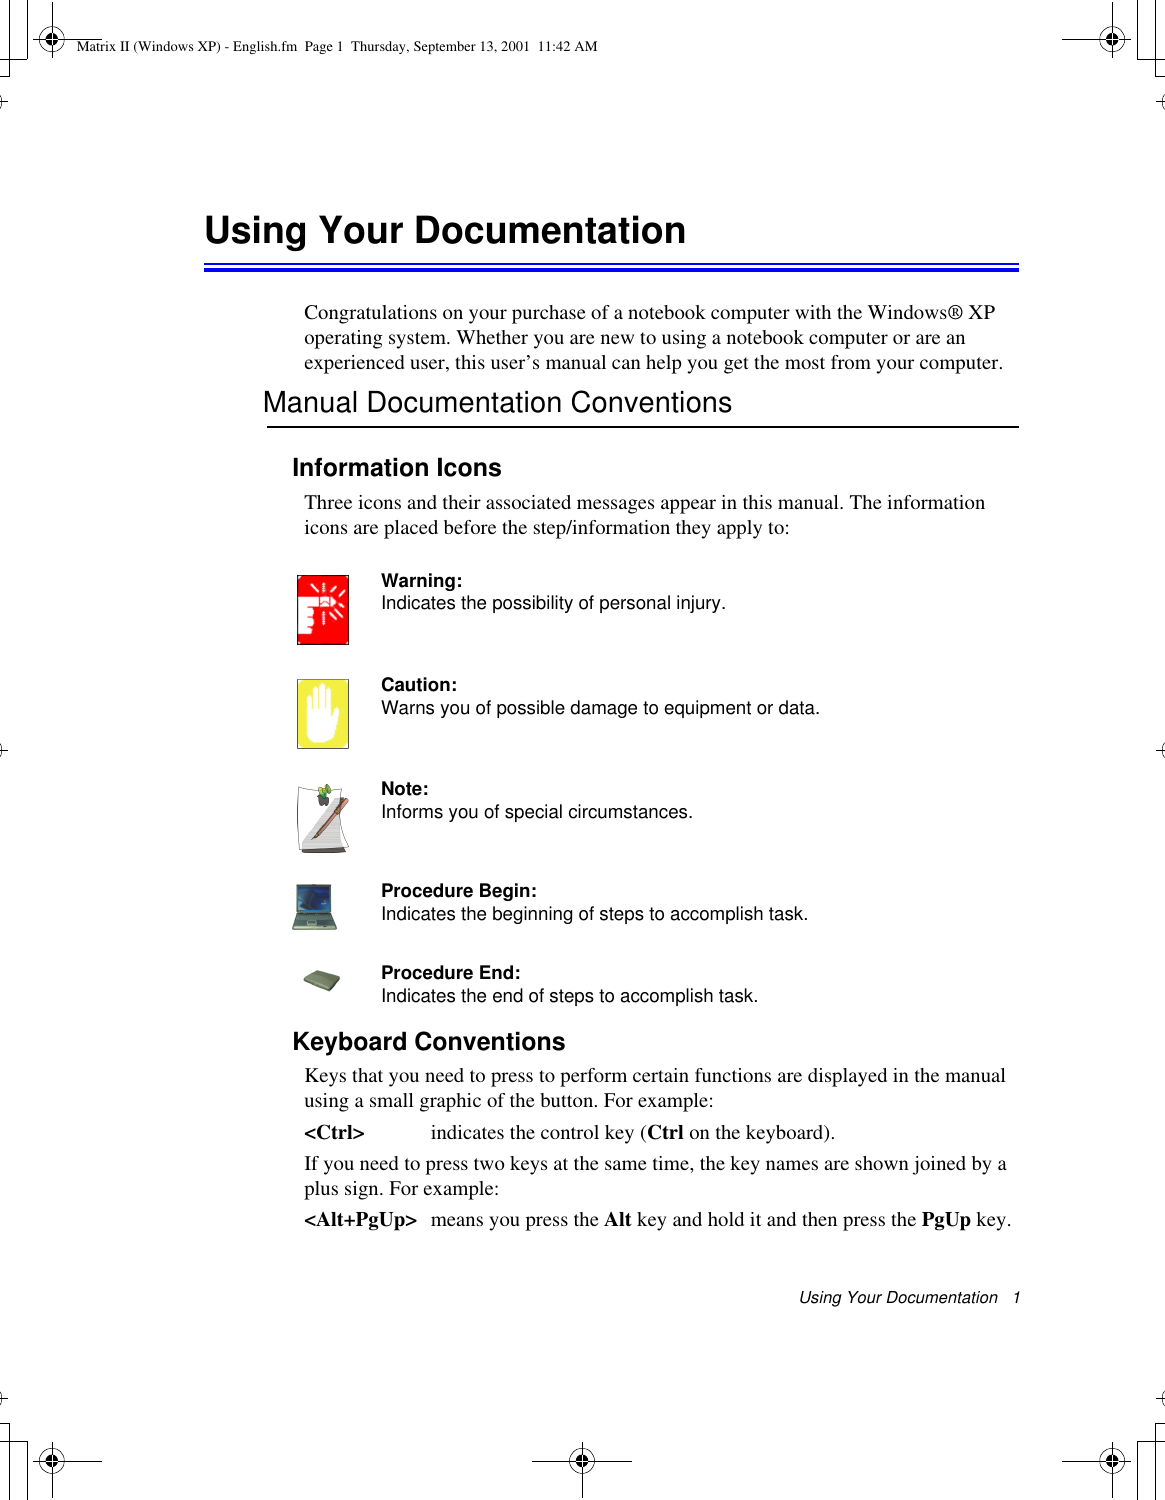 Using Your Documentation   1Using Your DocumentationCongratulations on your purchase of a notebook computer with the Windows® XP operating system. Whether you are new to using a notebook computer or are an experienced user, this user’s manual can help you get the most from your computer.Manual Documentation ConventionsInformation IconsThree icons and their associated messages appear in this manual. The information icons are placed before the step/information they apply to:Warning:Indicates the possibility of personal injury.Caution:Warns you of possible damage to equipment or data.Note:Informs you of special circumstances.Procedure Begin:Indicates the beginning of steps to accomplish task.Procedure End:Indicates the end of steps to accomplish task.Keyboard ConventionsKeys that you need to press to perform certain functions are displayed in the manual using a small graphic of the button. For example: &lt;Ctrl&gt; indicates the control key (Ctrl on the keyboard). If you need to press two keys at the same time, the key names are shown joined by a plus sign. For example:&lt;Alt+PgUp&gt; means you press the Alt key and hold it and then press the PgUp key.Matrix II (Windows XP) - English.fm  Page 1  Thursday, September 13, 2001  11:42 AM